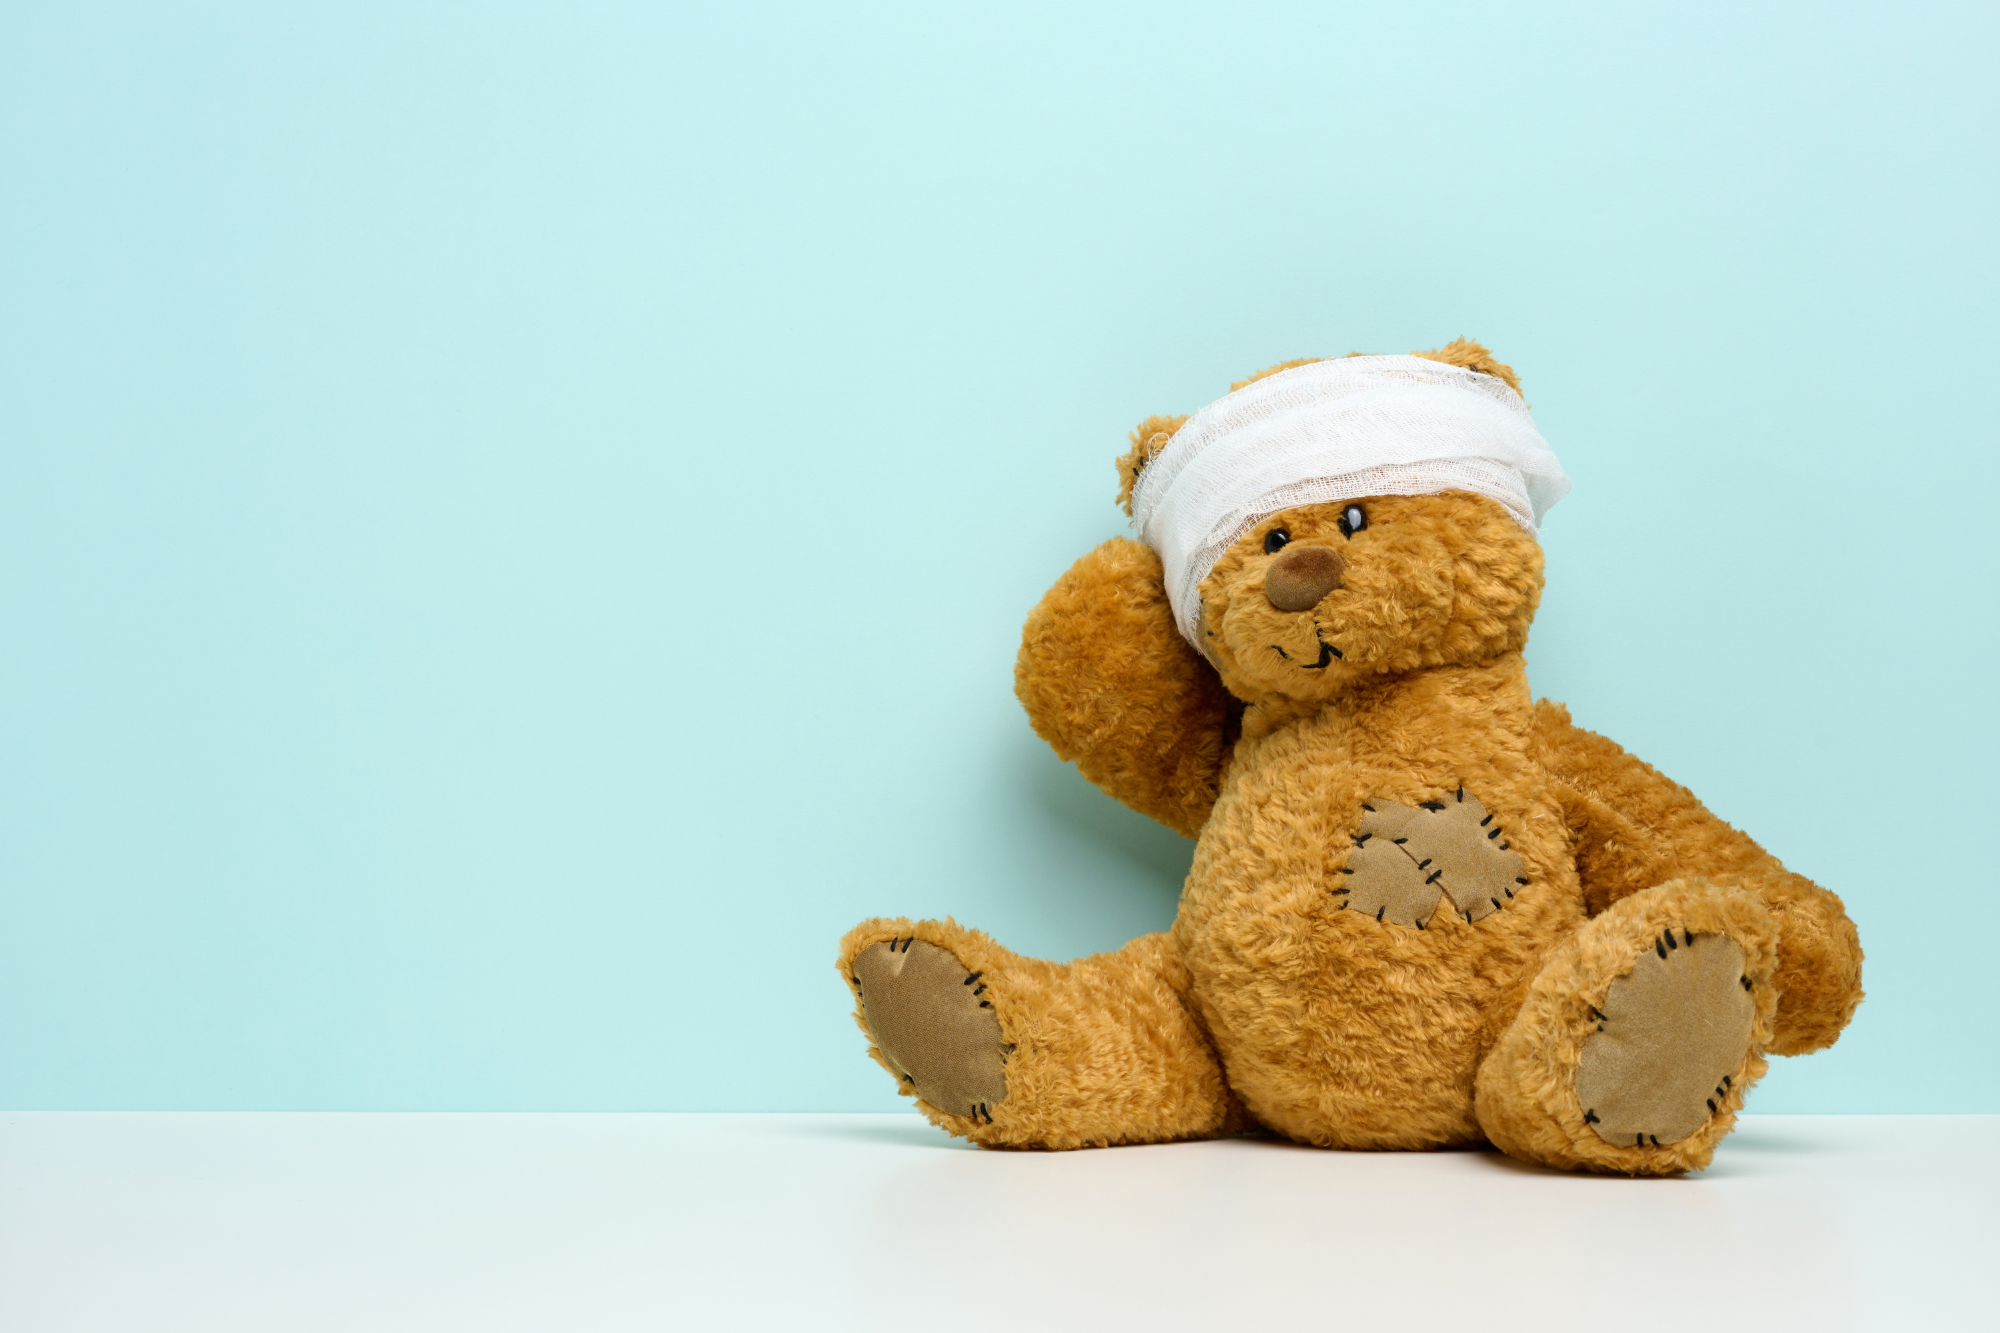 A teddy bear with a bandage around his head represents the effects of childhood trauma in adulthood.